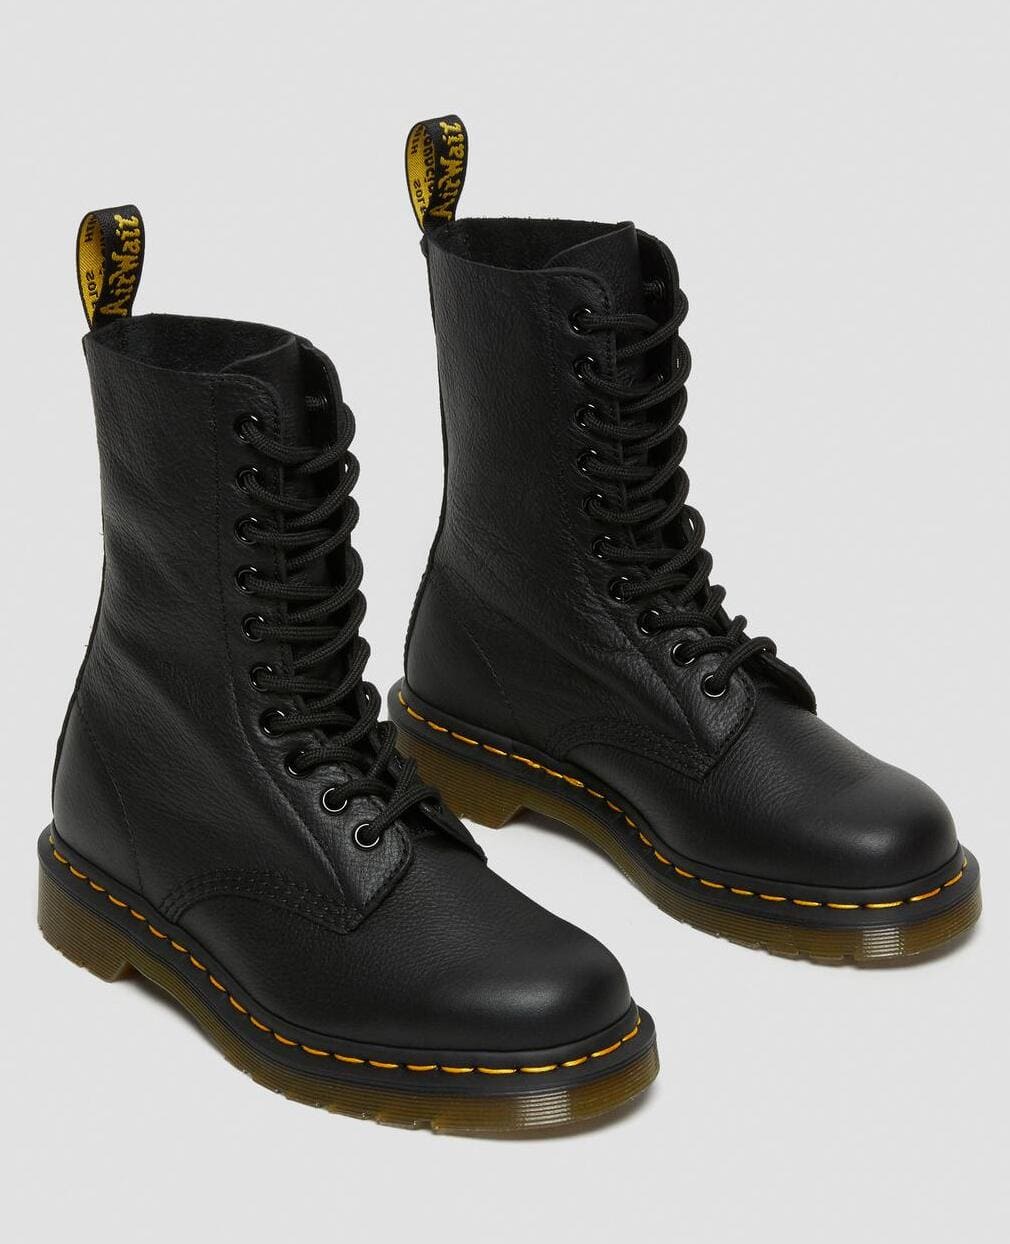 Dr. Martens 1490 Virginia Leather Mid Calf Boots Black